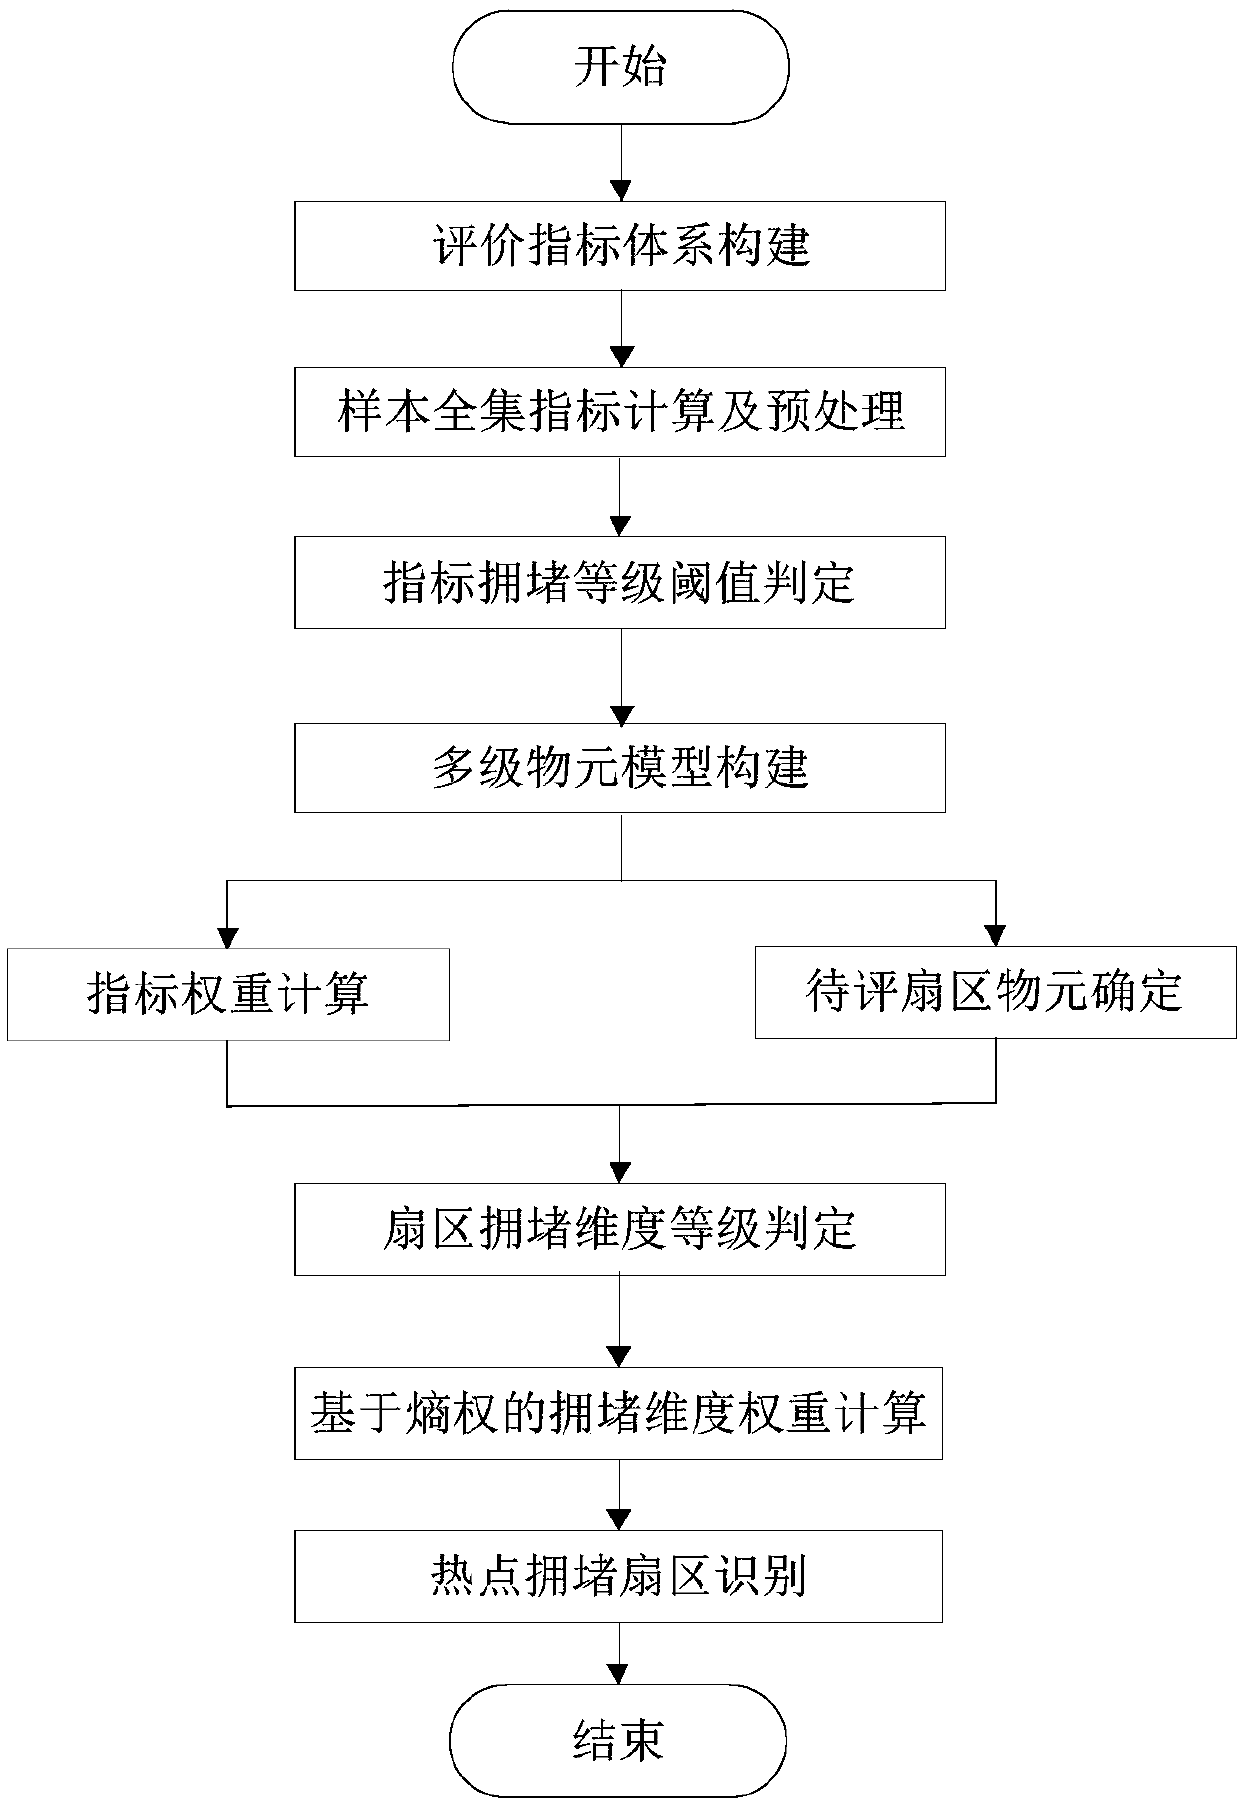 Multi-level matter-element entropy weight-based congestion hotspot airspace sector recognition method